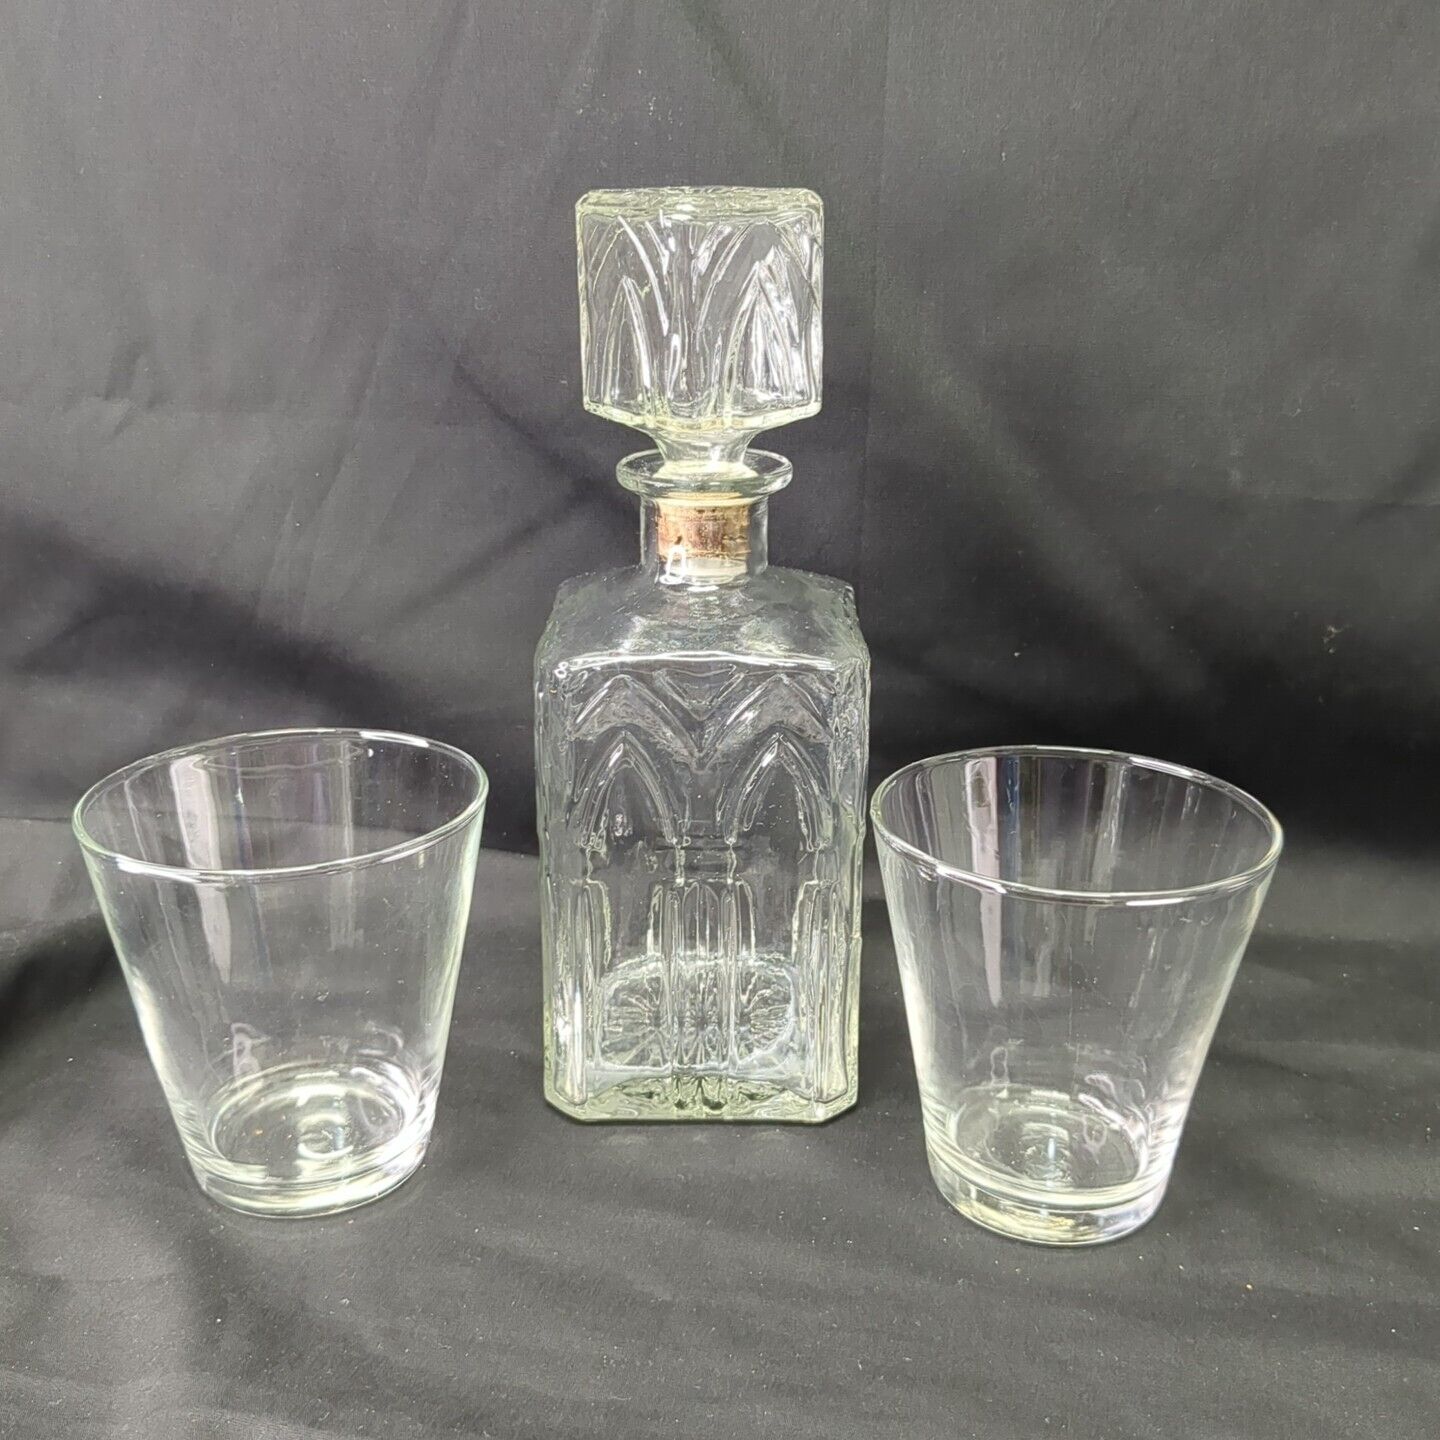 Vintage Whiskey Decanters Glasses Are Not Vintage Mud Century Core Grandpa Core